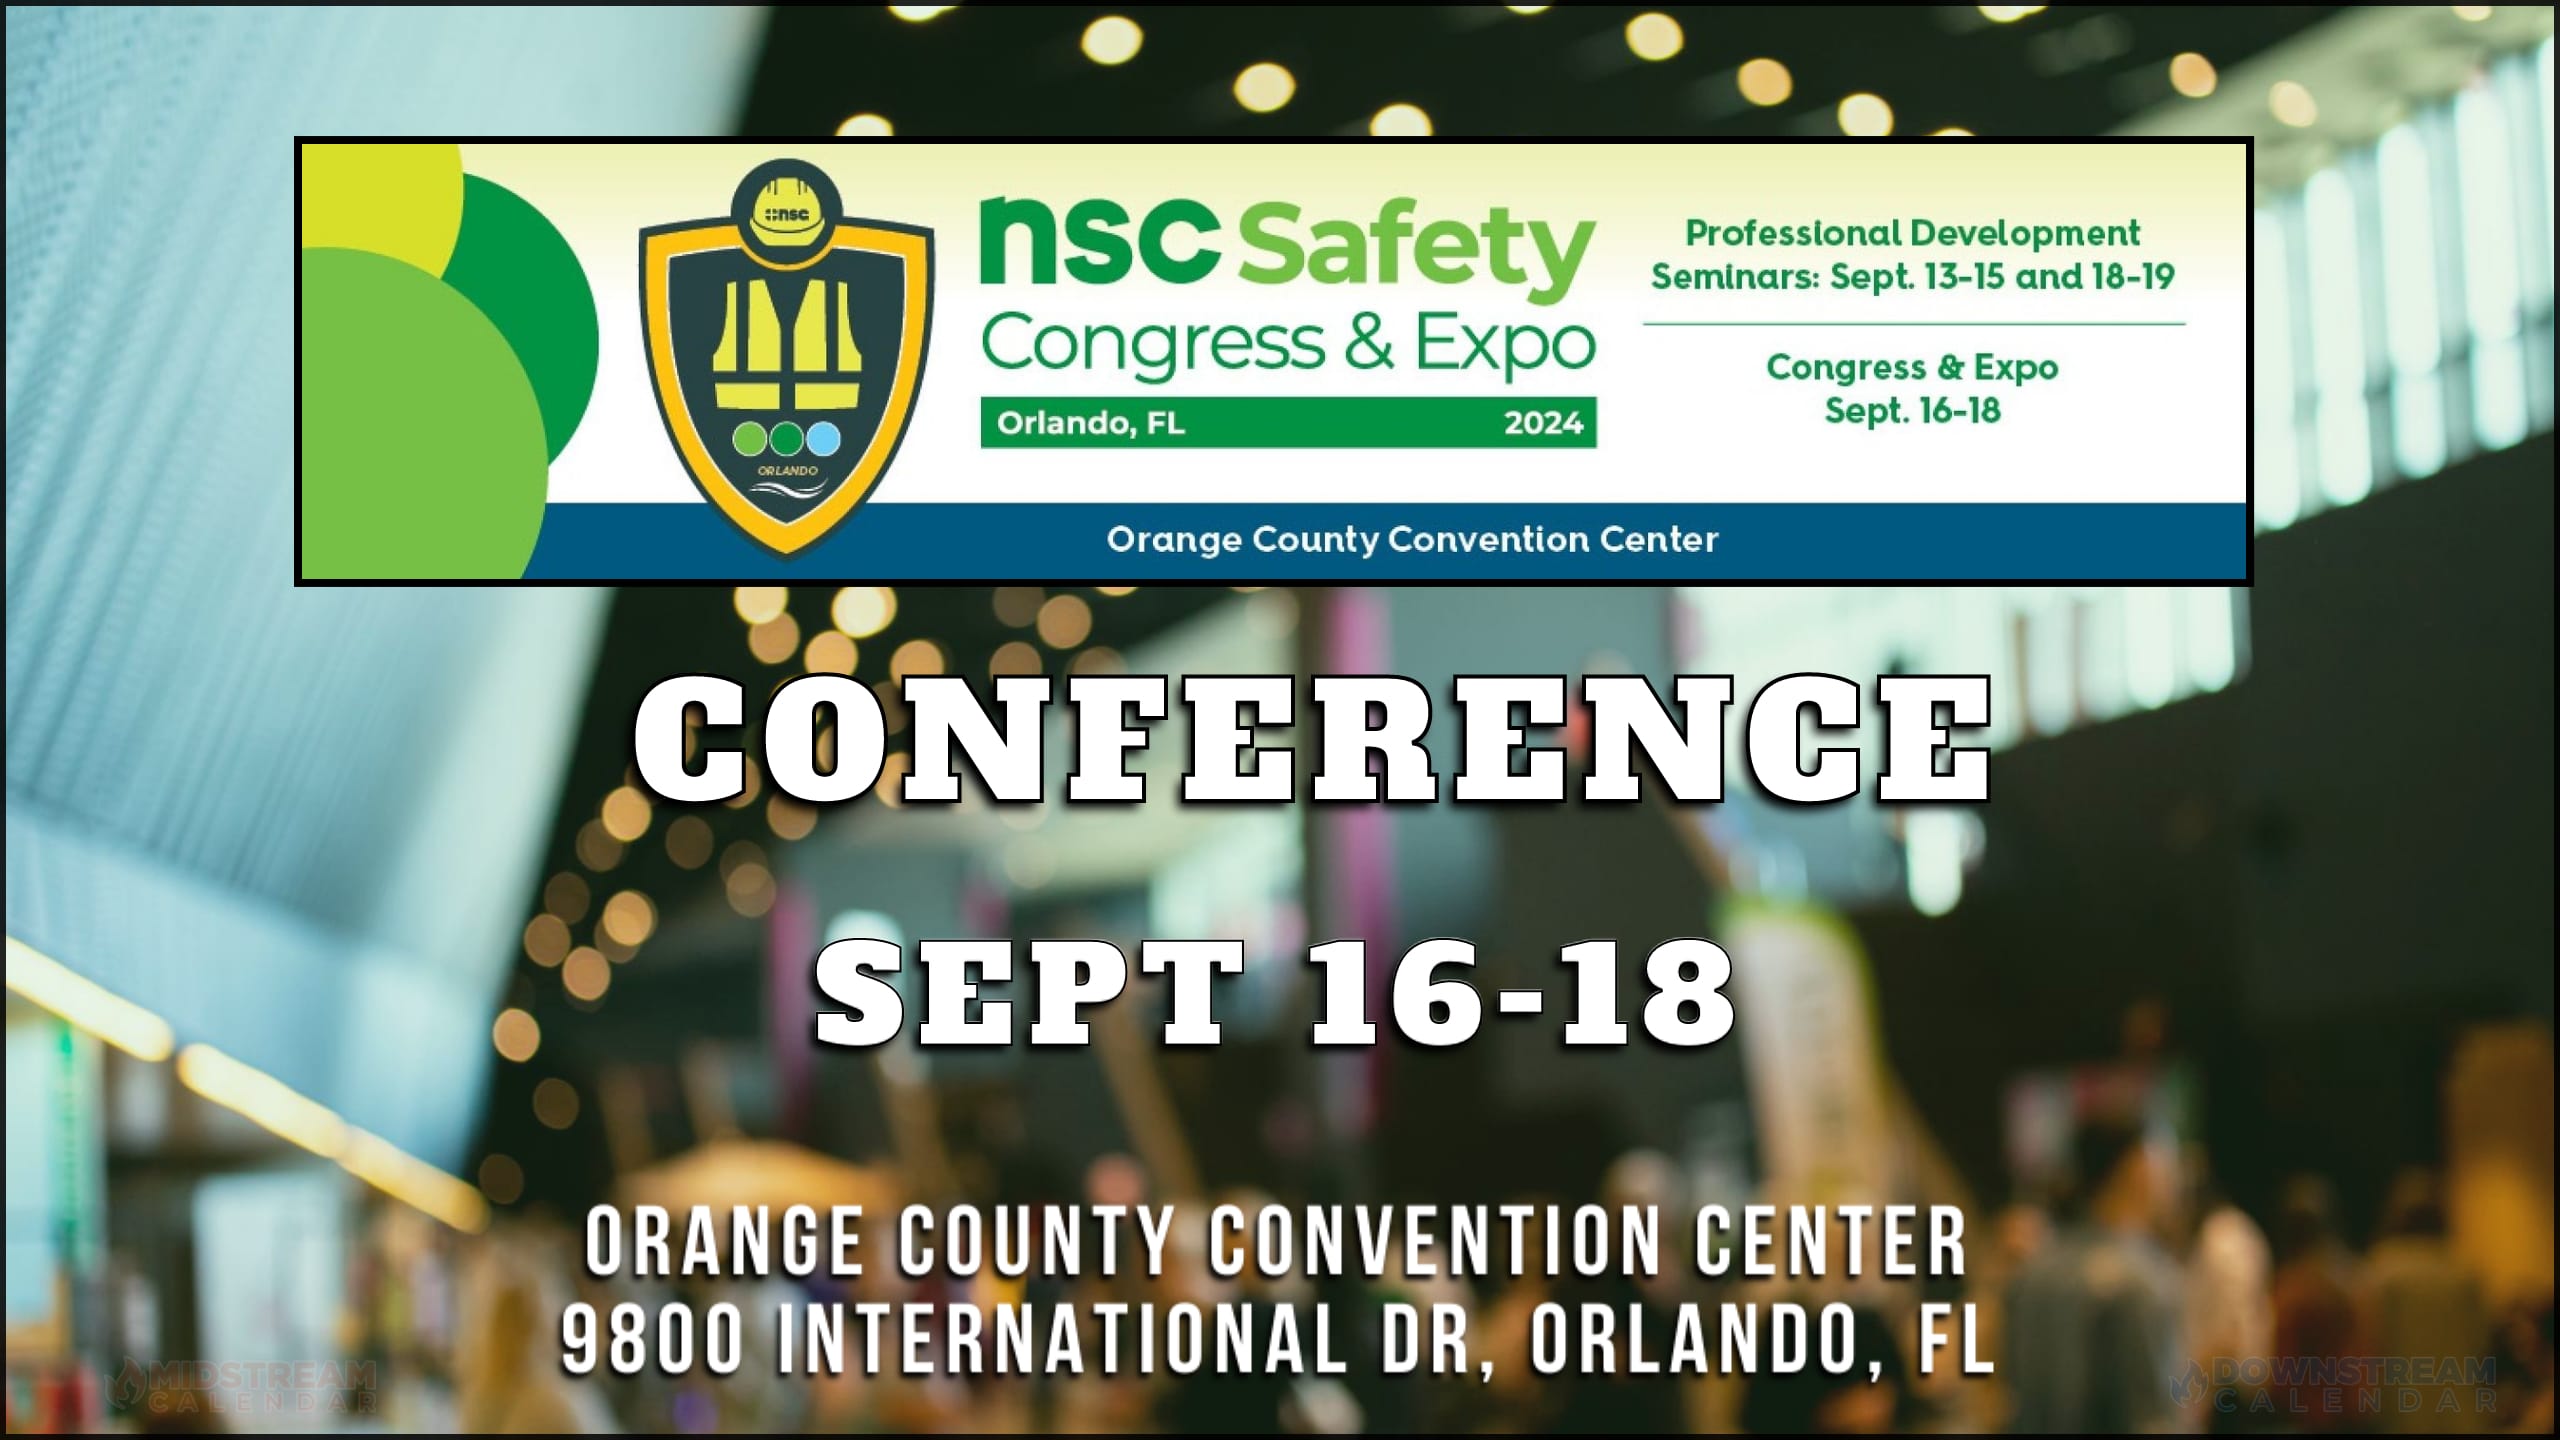 Register for the NSC Safety Congress & Expo Sept 1618, 2024 Orlando